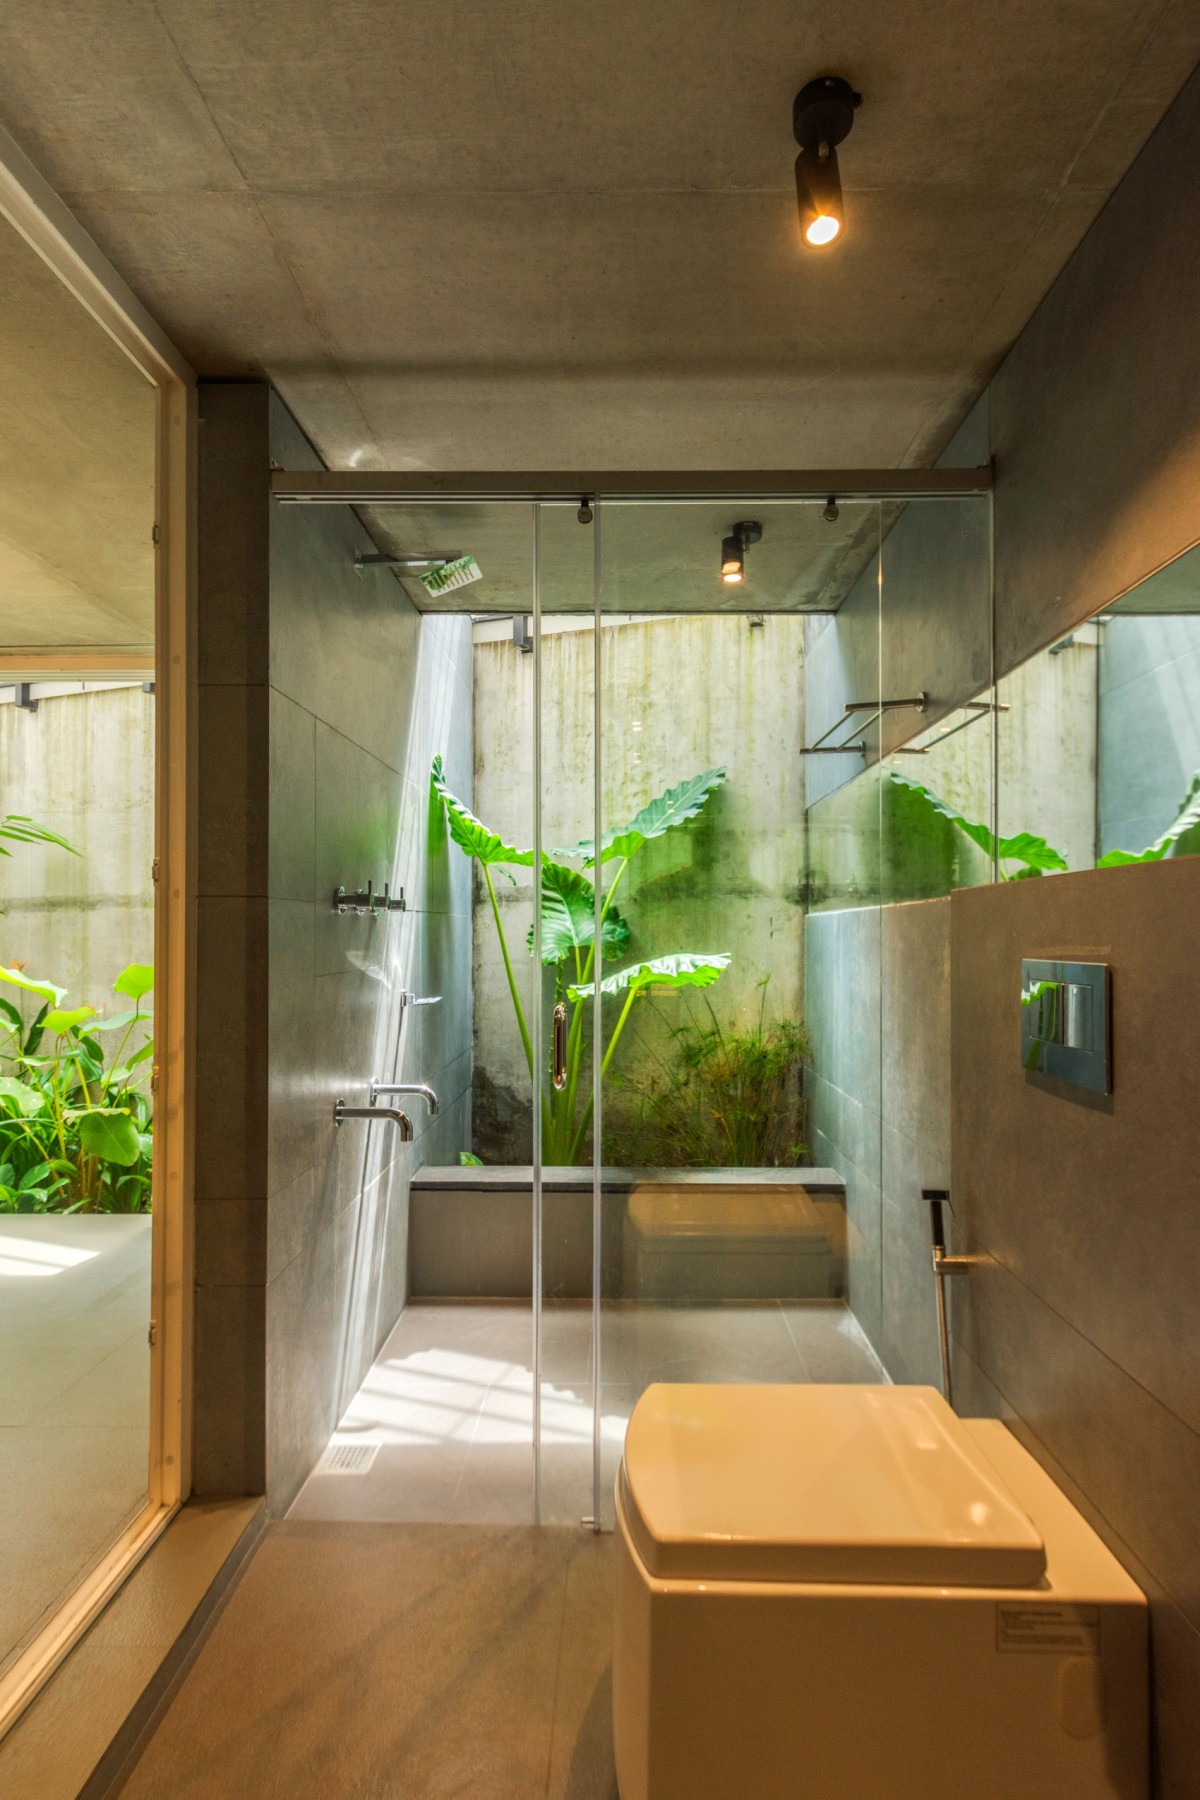 Bathroom and Toilet of Buoyant Hue by Mindspark Architects